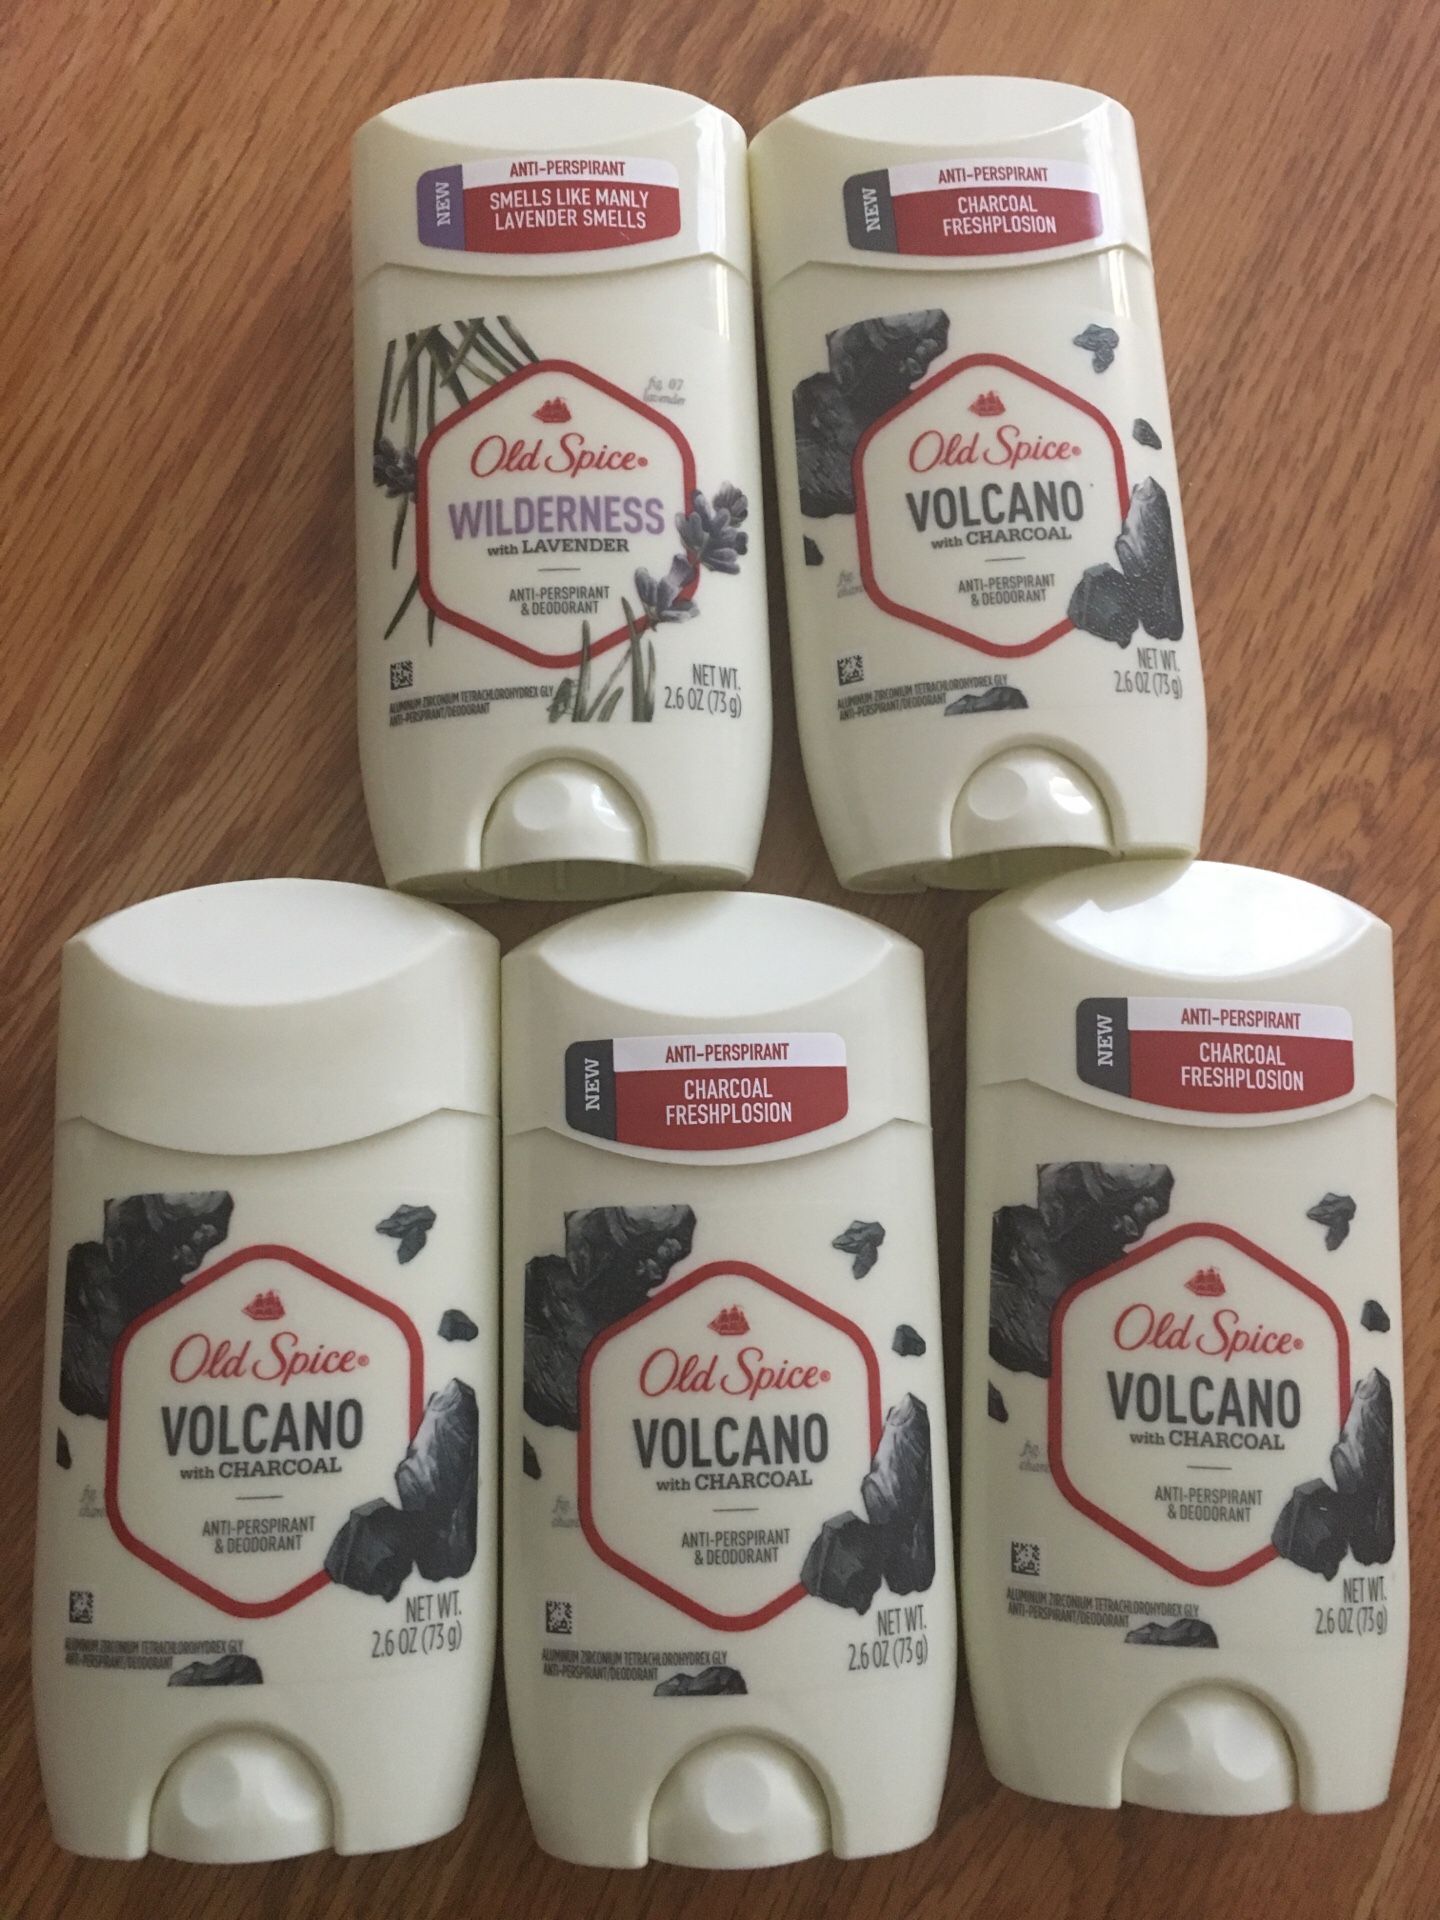 4 OLD SPICE VOLCANO 1 LAVENDER WITH CHARCOAL